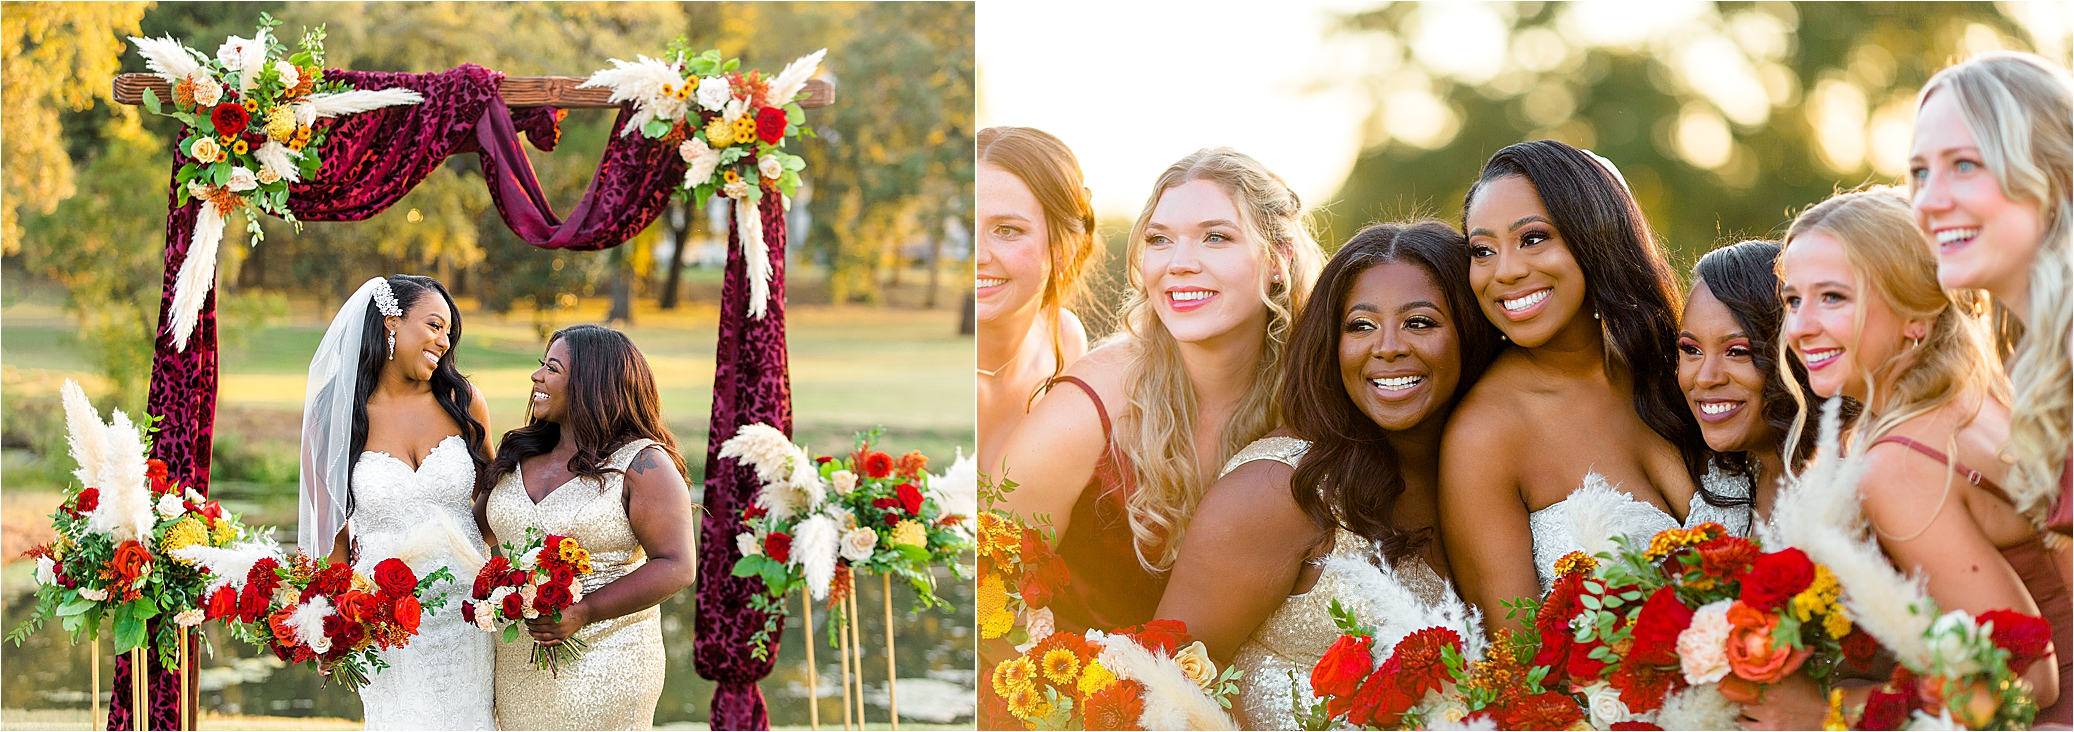 Bridesmaids photos with lots of red, gold and greenery at The Milestone by Boerne Wedding Photographer Jillian Hogan 